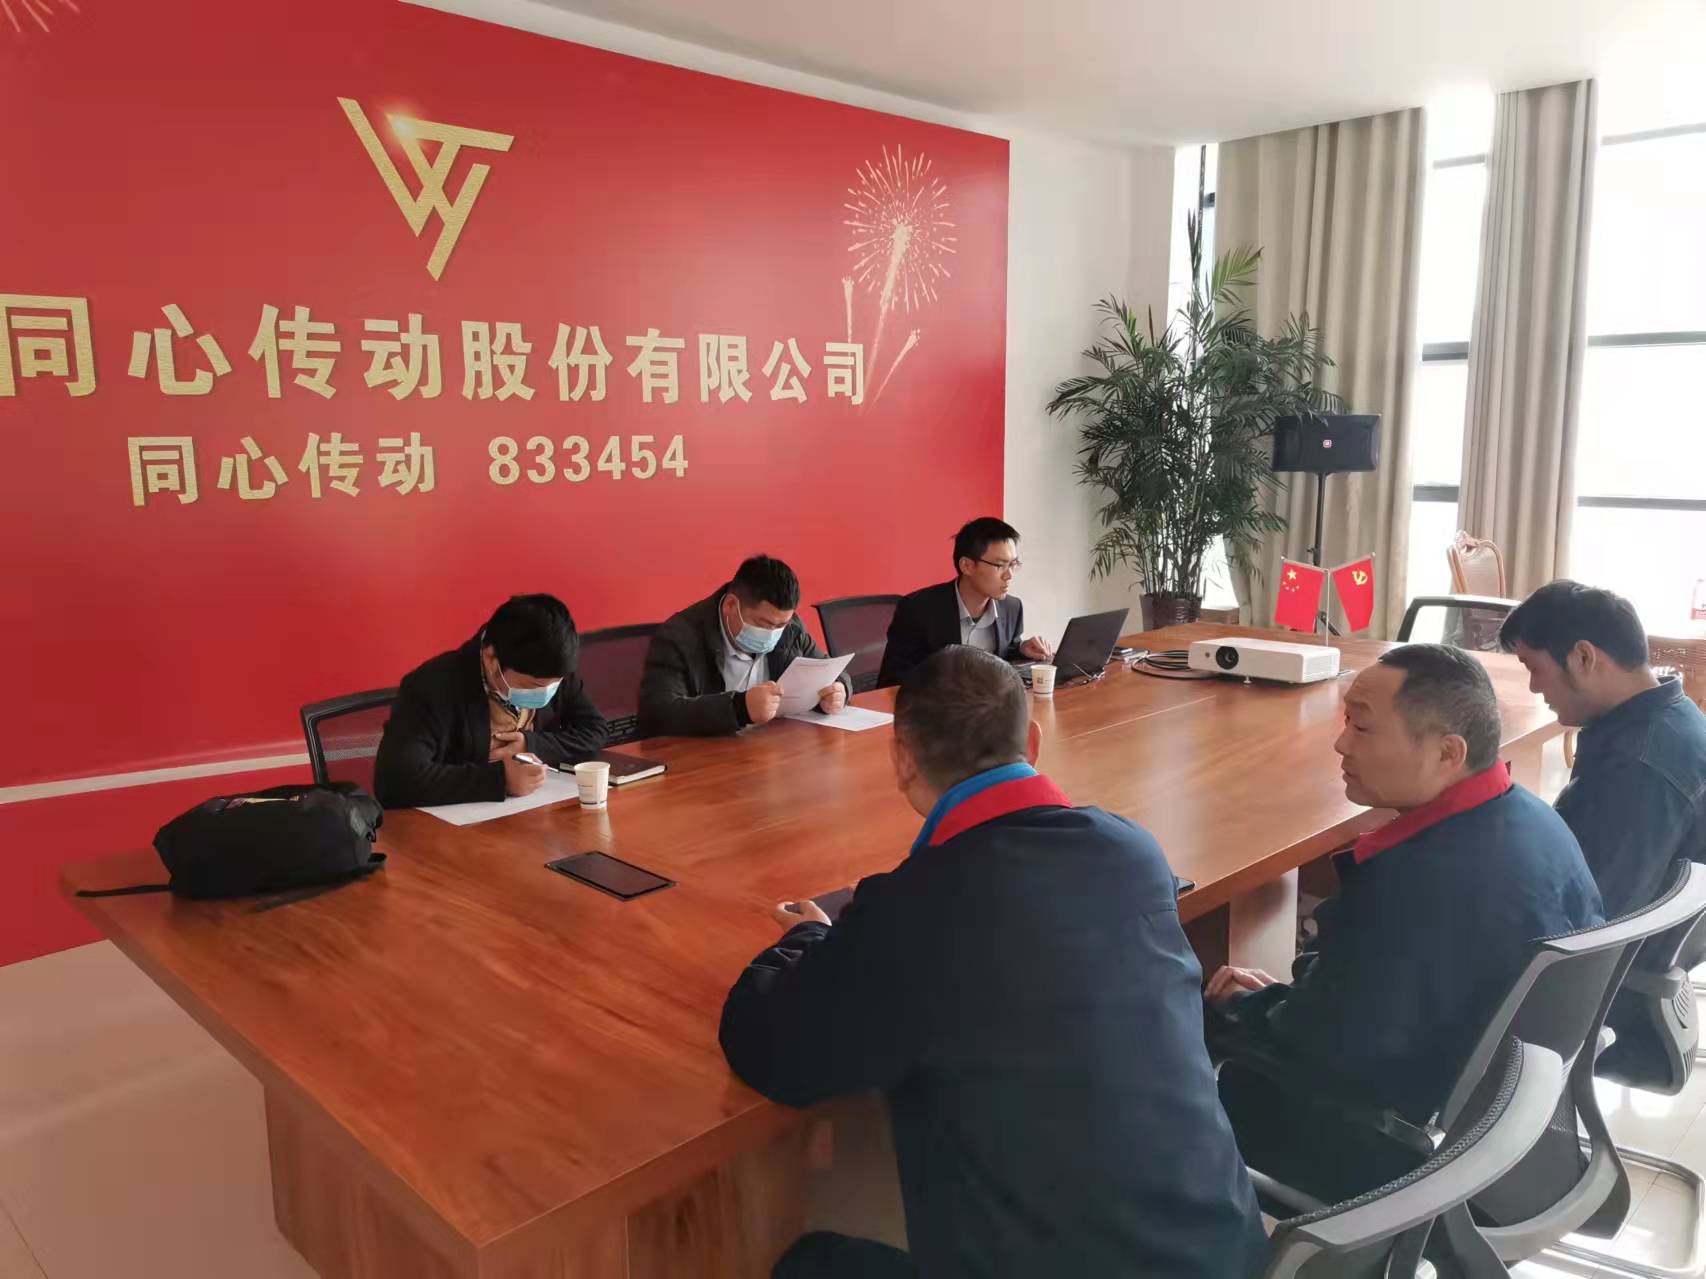 Zhengzhou Yutong Group came to our company's management system for a comprehensive review